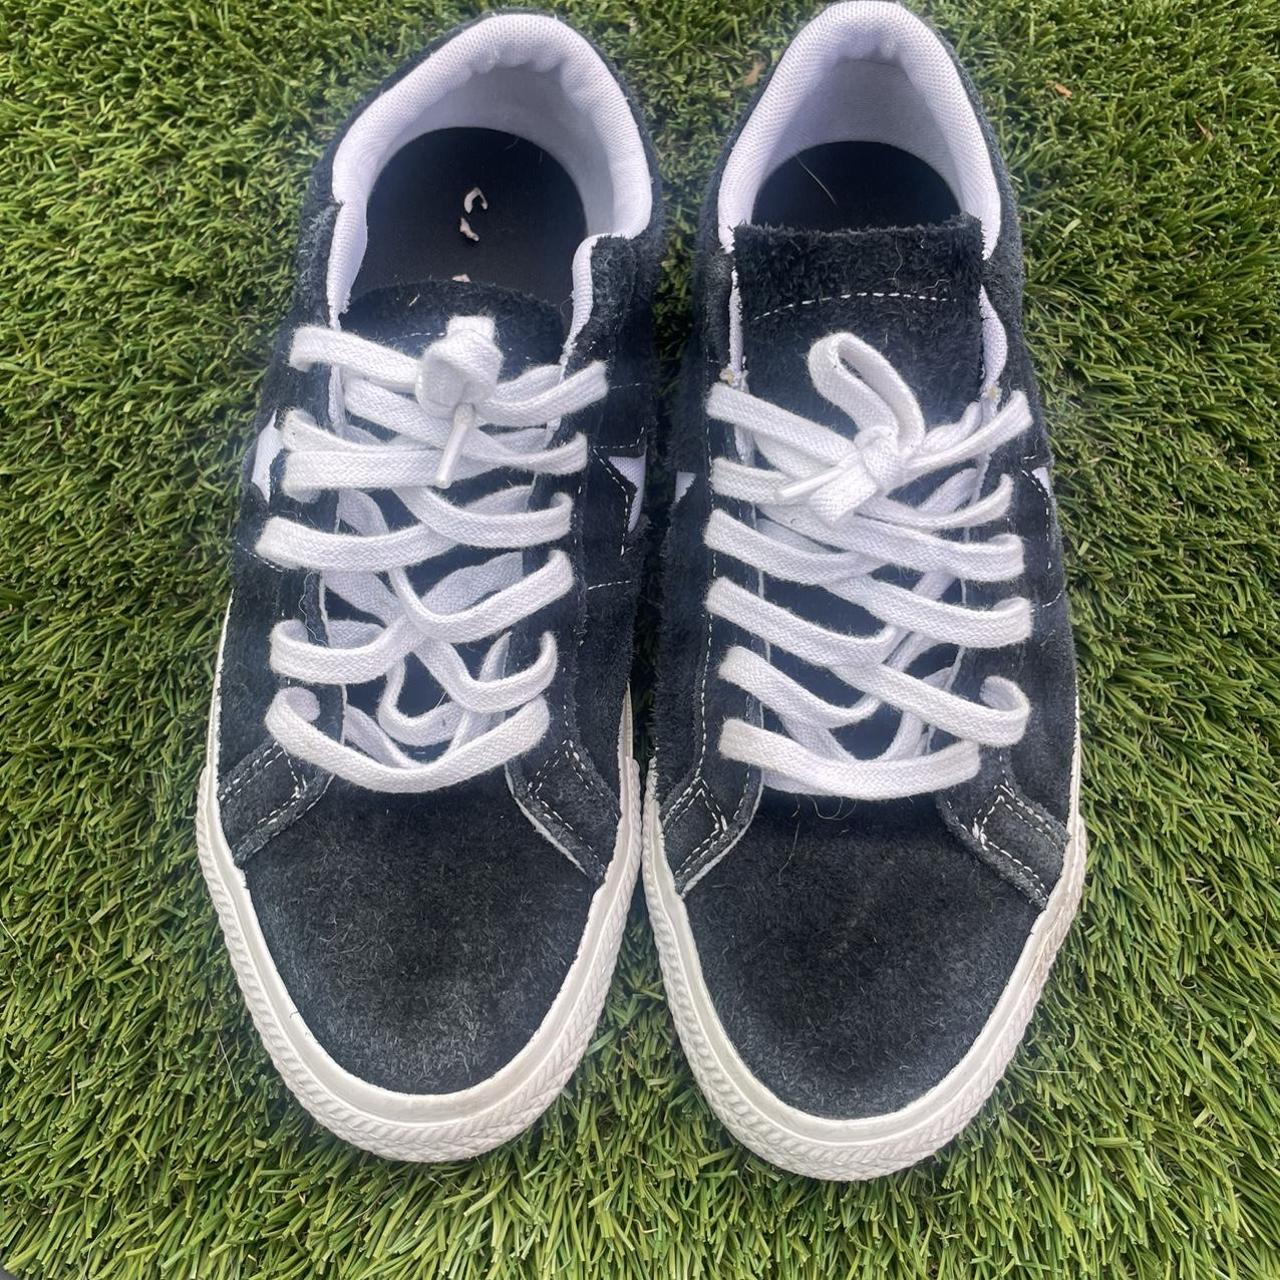 Product Image 2 - size 9 converse one star
could